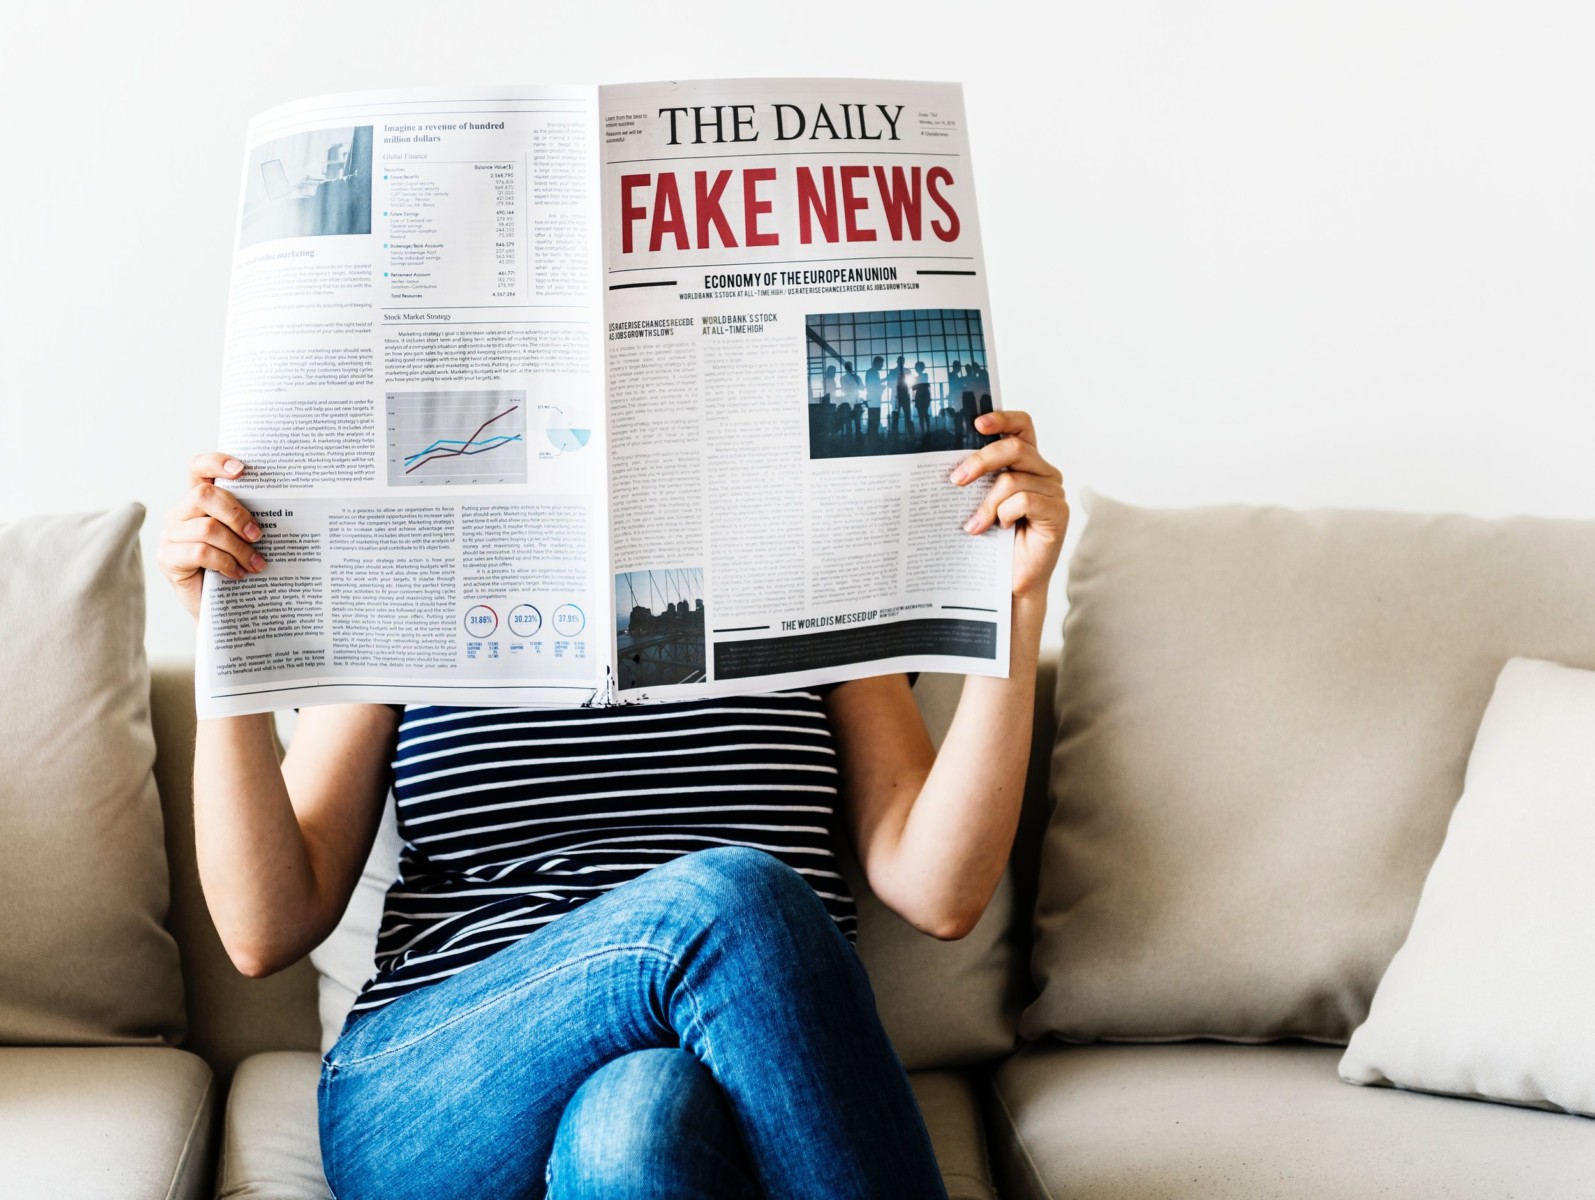 Arming the readers in the war against #fakenews